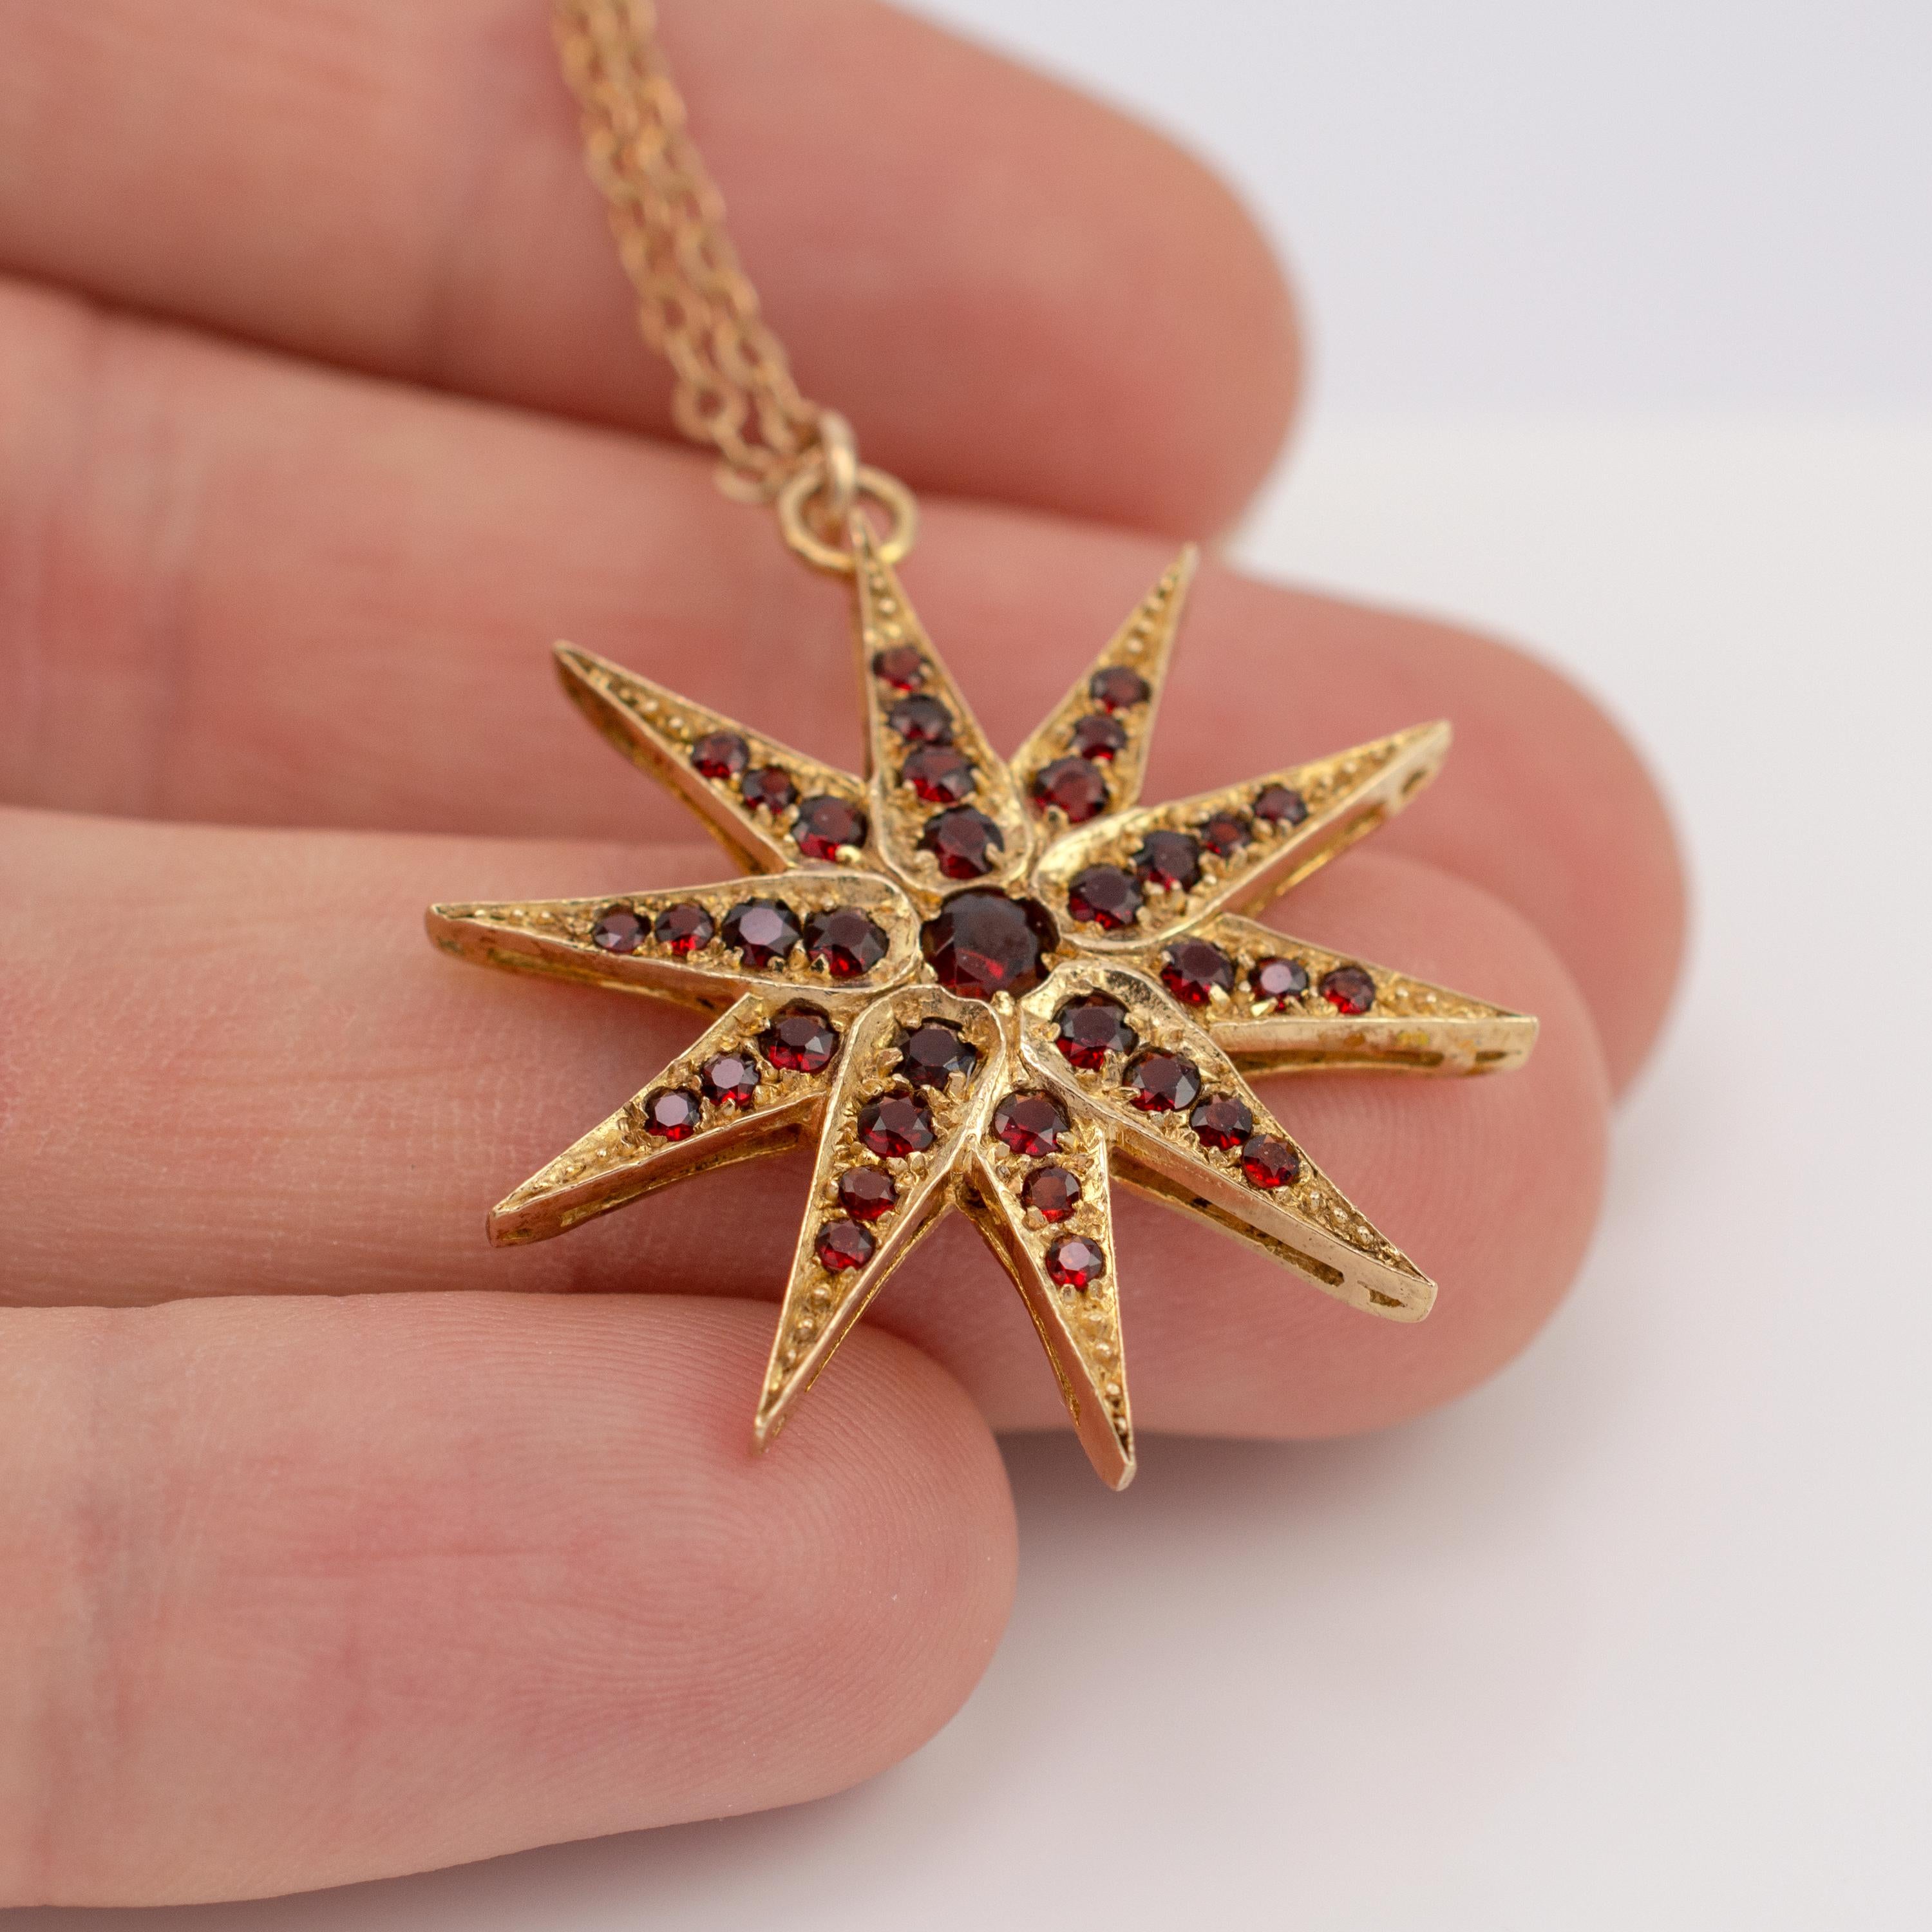 A striking garnet starburst pendant in gold hallmarked and dated London 1972.

The Victorian-style star pendant, measuring a substantial 3.2 centimeters in diameter, is bejeweled with graduated round cut garnets totaling approx 0.90 cts and a 0.15